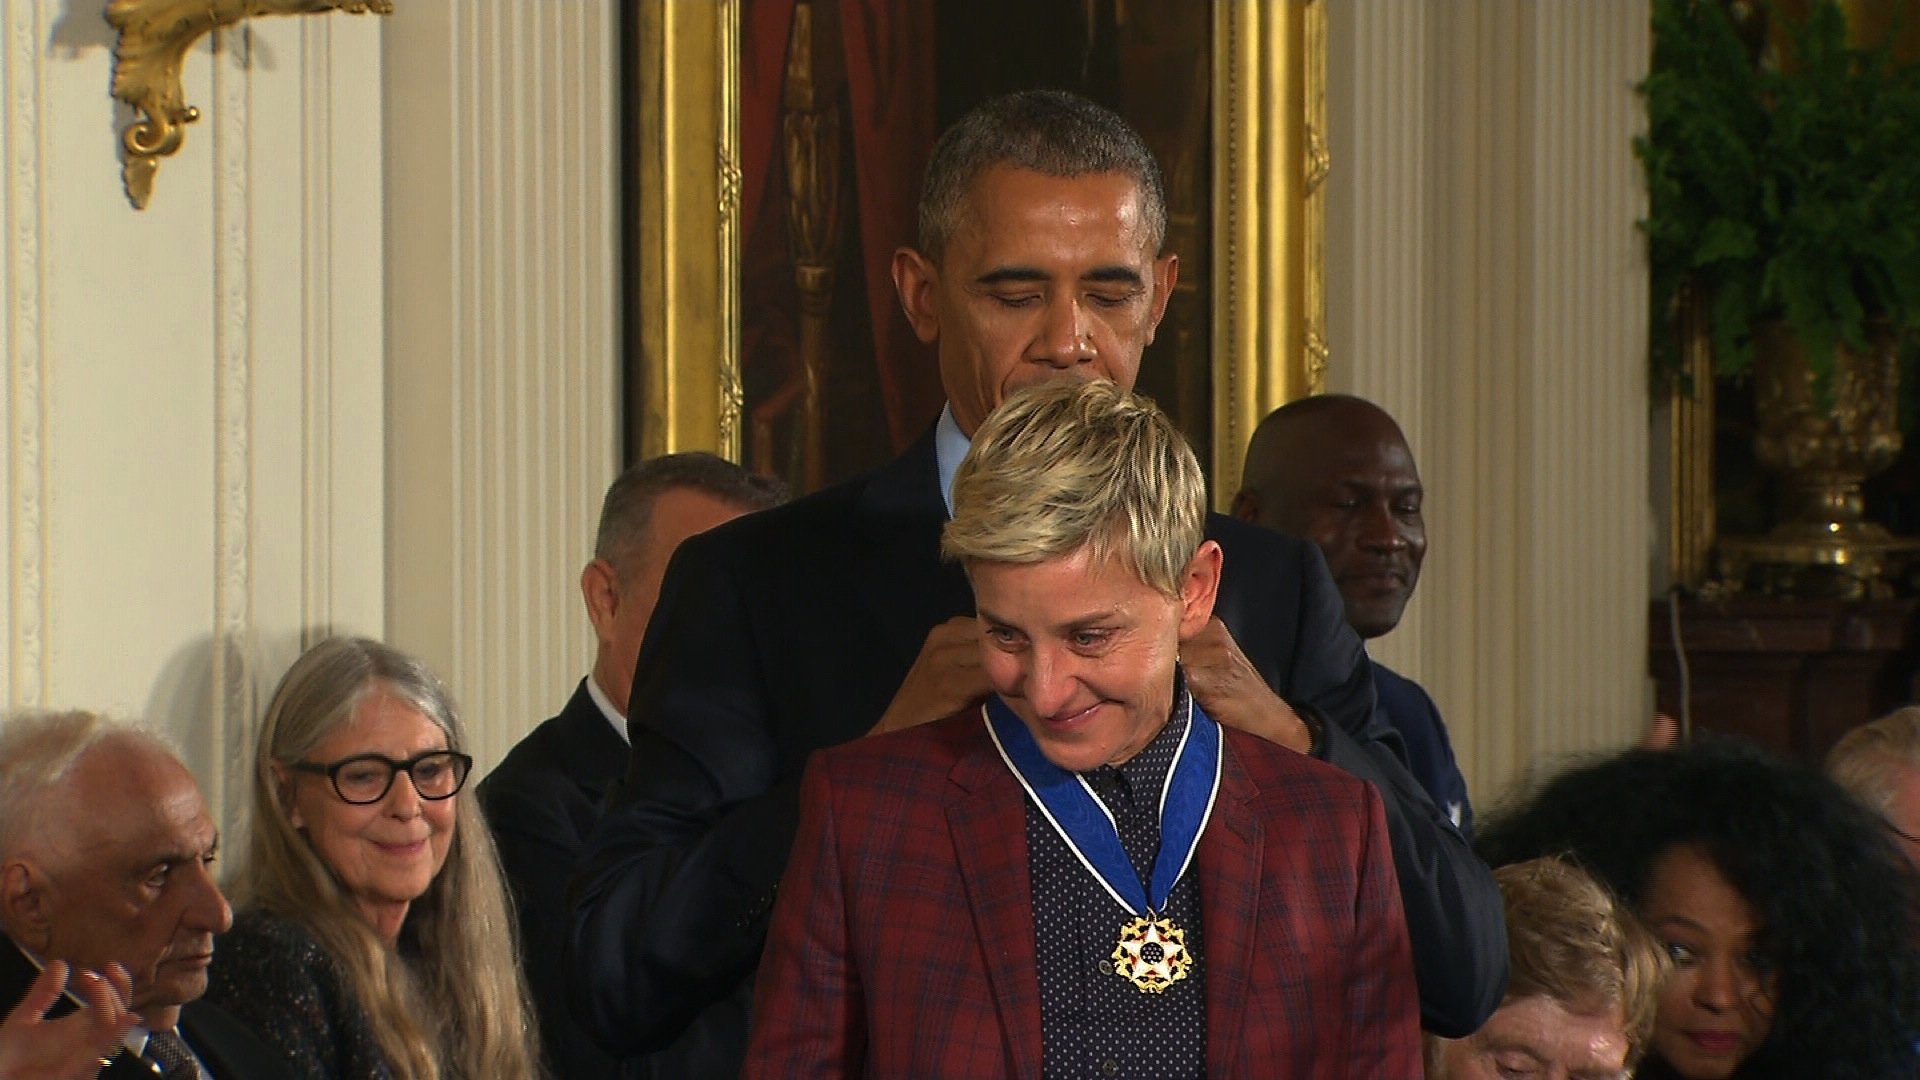 Ellen DeGeneres was among the honorees at the Presidential Medal of Freedom ceremony on Tuesday, but she almost didn't make it into the White House.